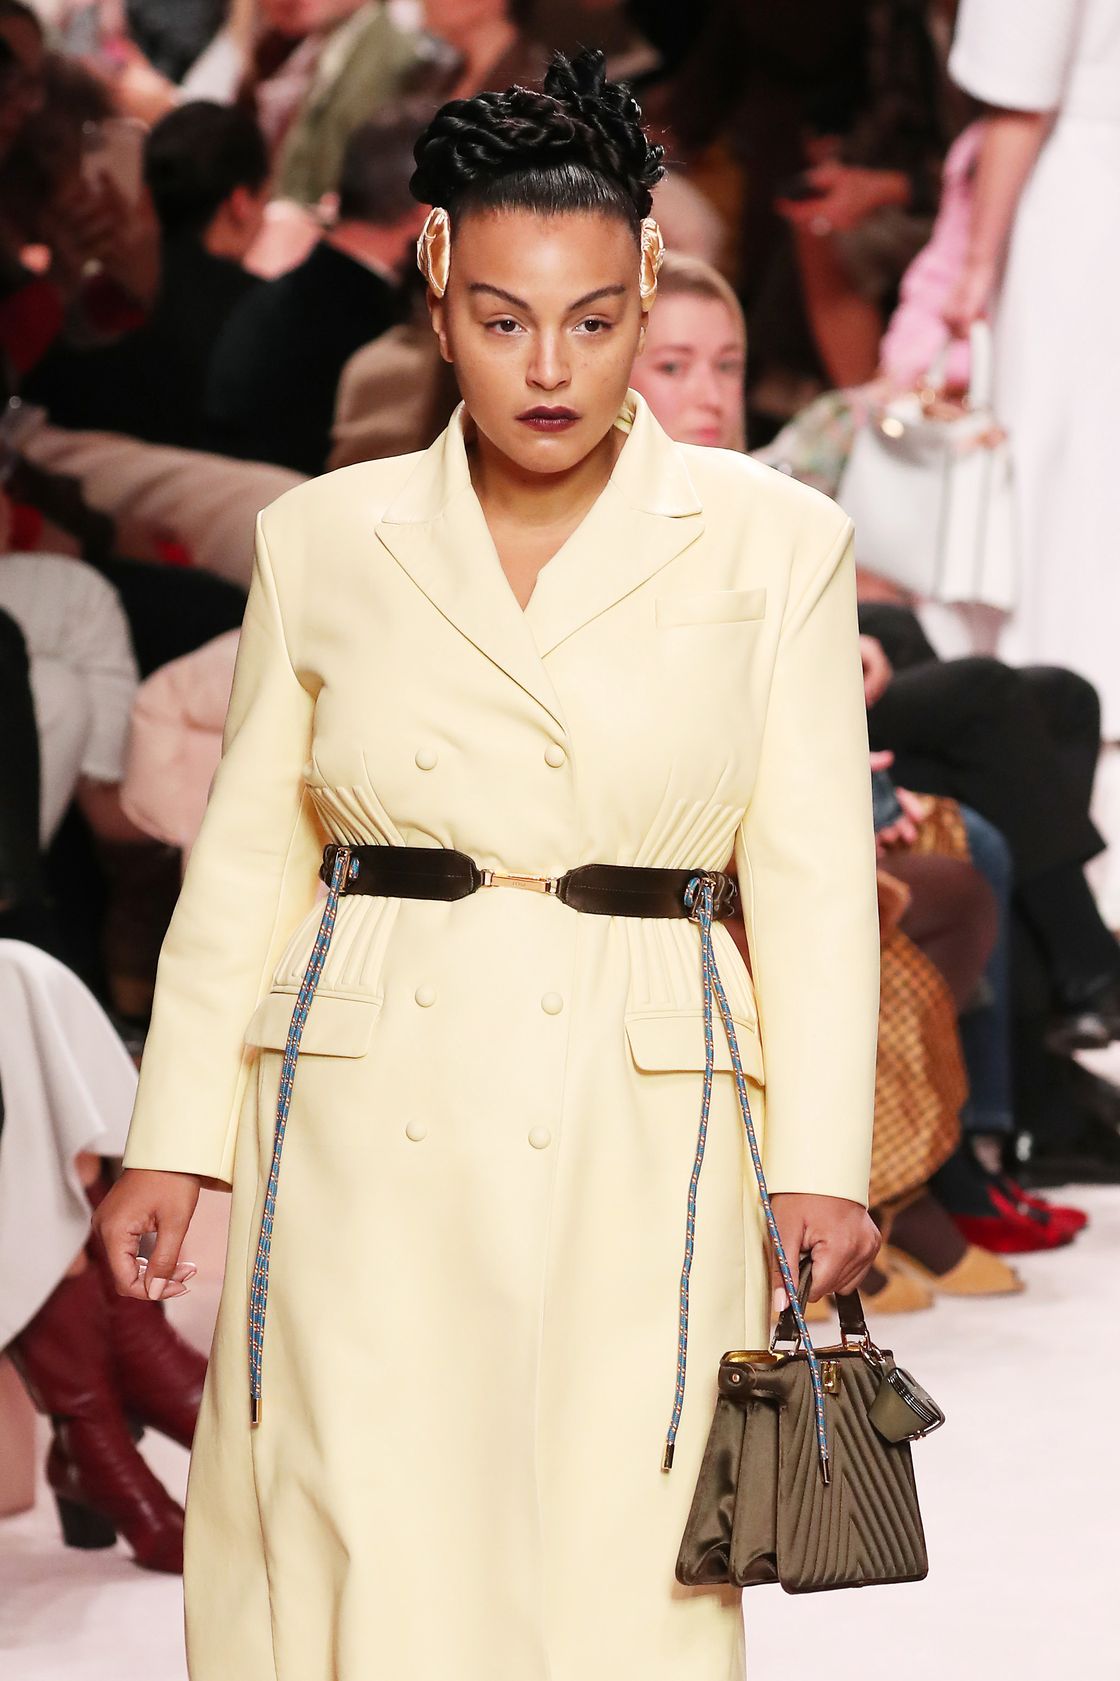 Fendi Fall 2020 Runway Features Plus Size Models Paloma Elsesser And